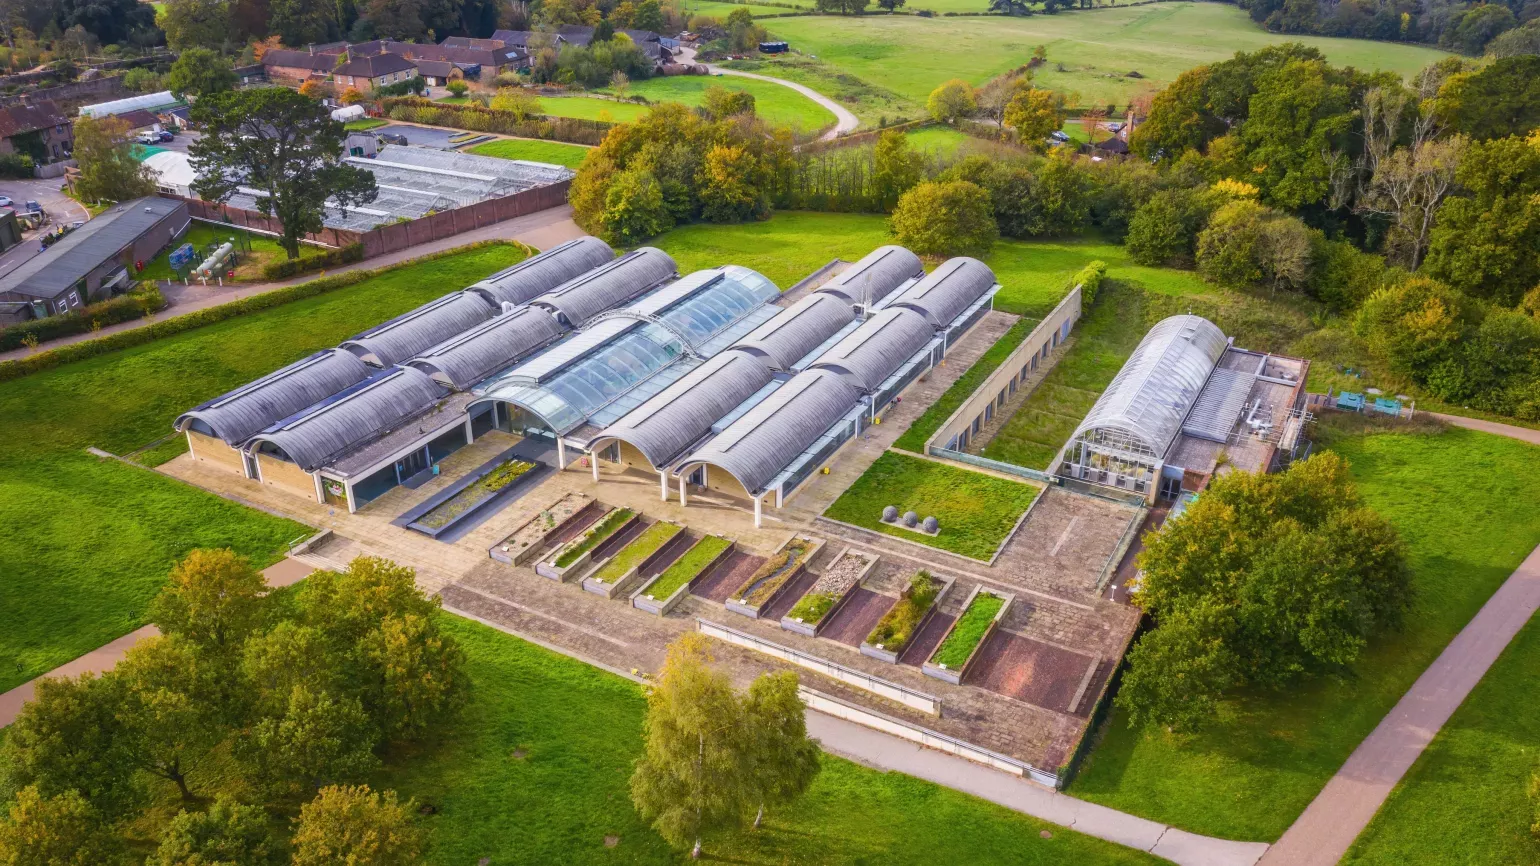 Large glasshouse in a green landscape from above